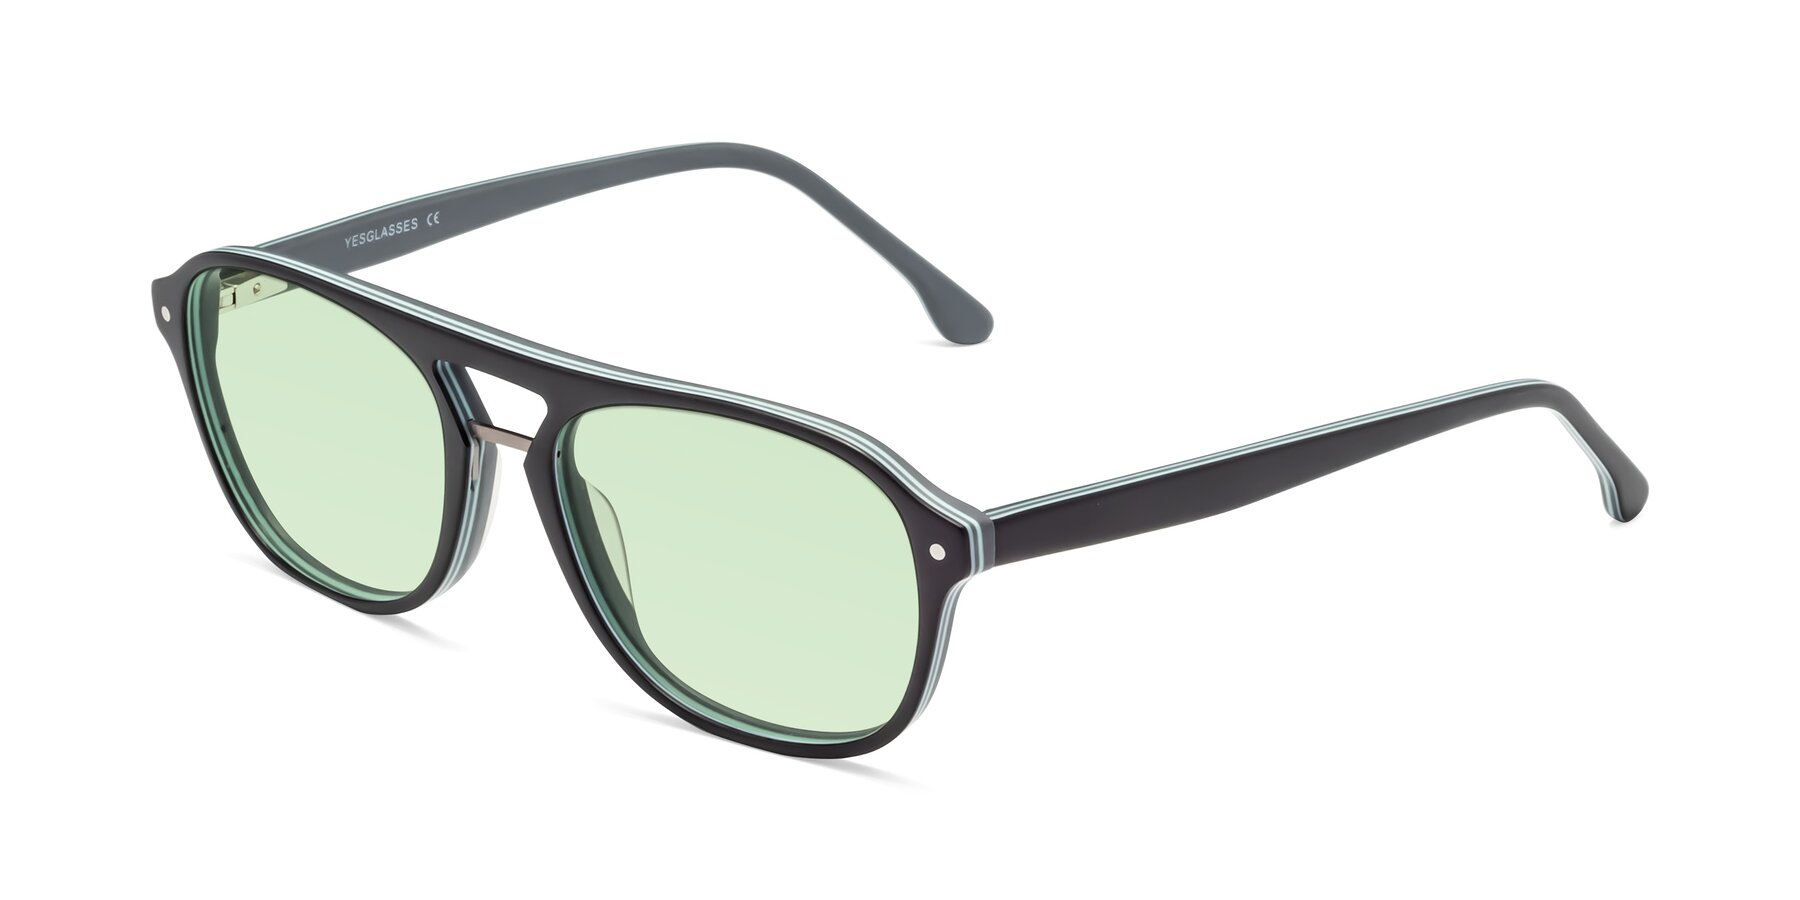 Angle of 17416 in Matte Black with Light Green Tinted Lenses